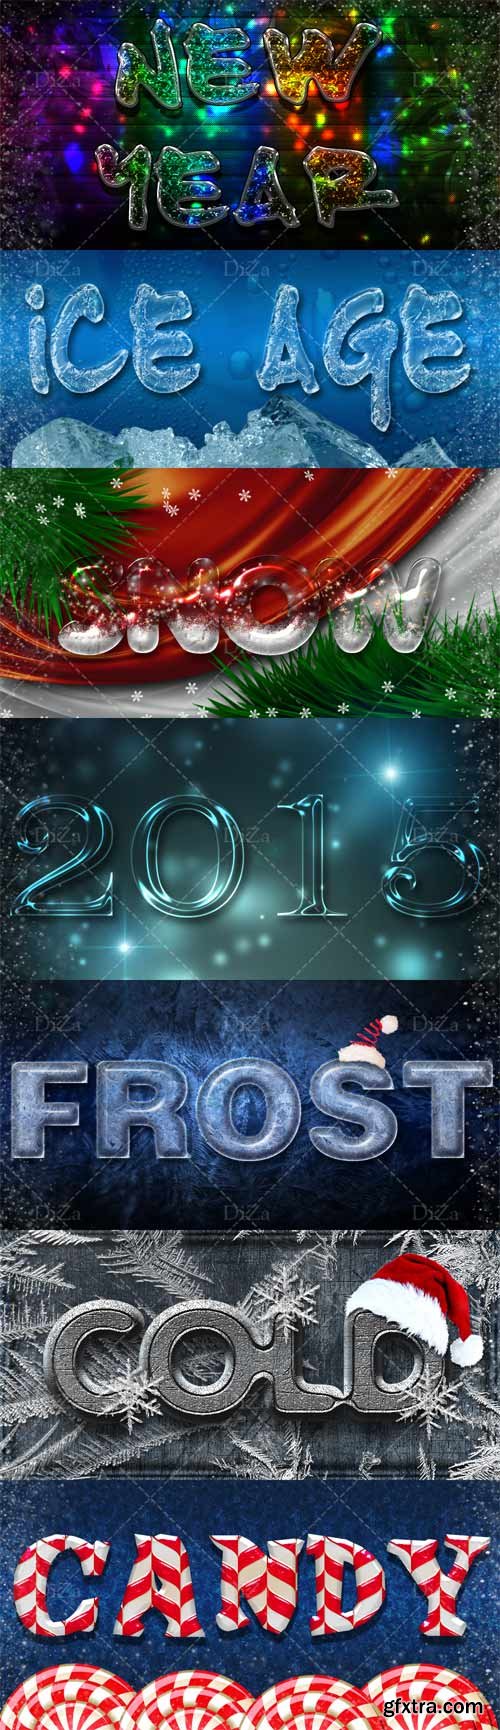 2015 New Year\'s styles